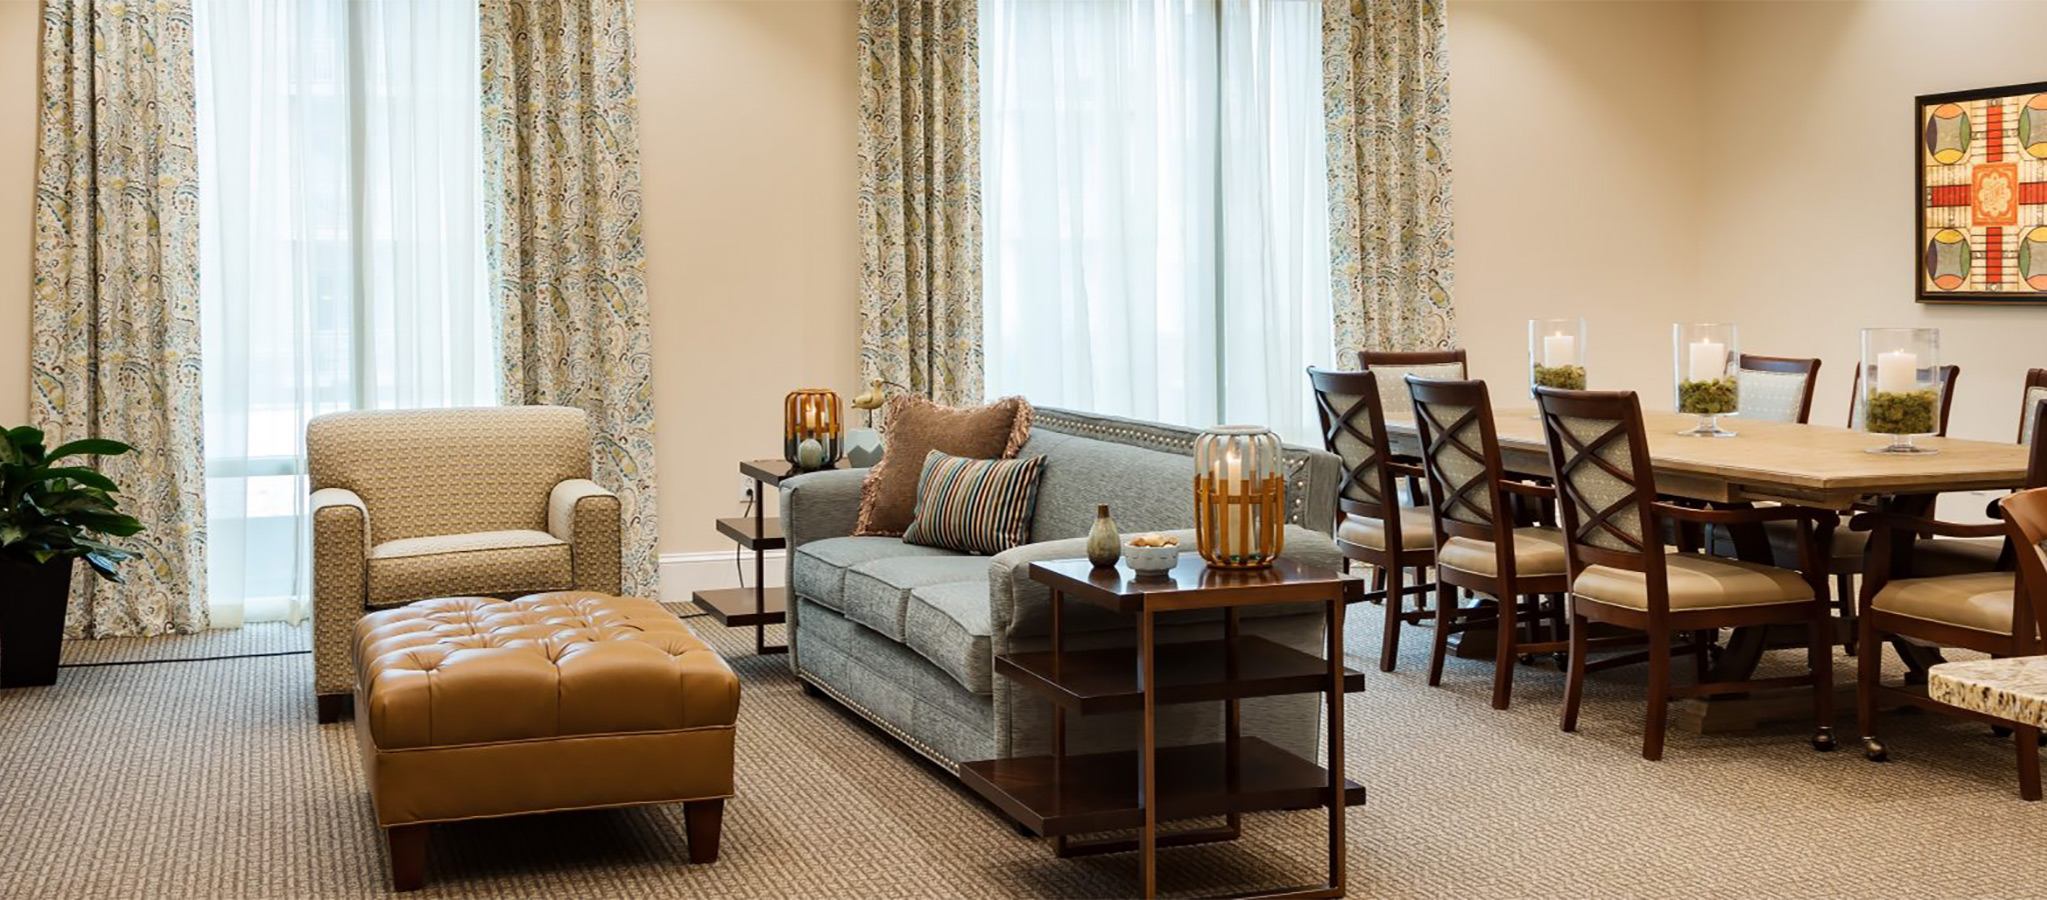 Spacious, well-appointed living area in the memory care section of The Cardinal.